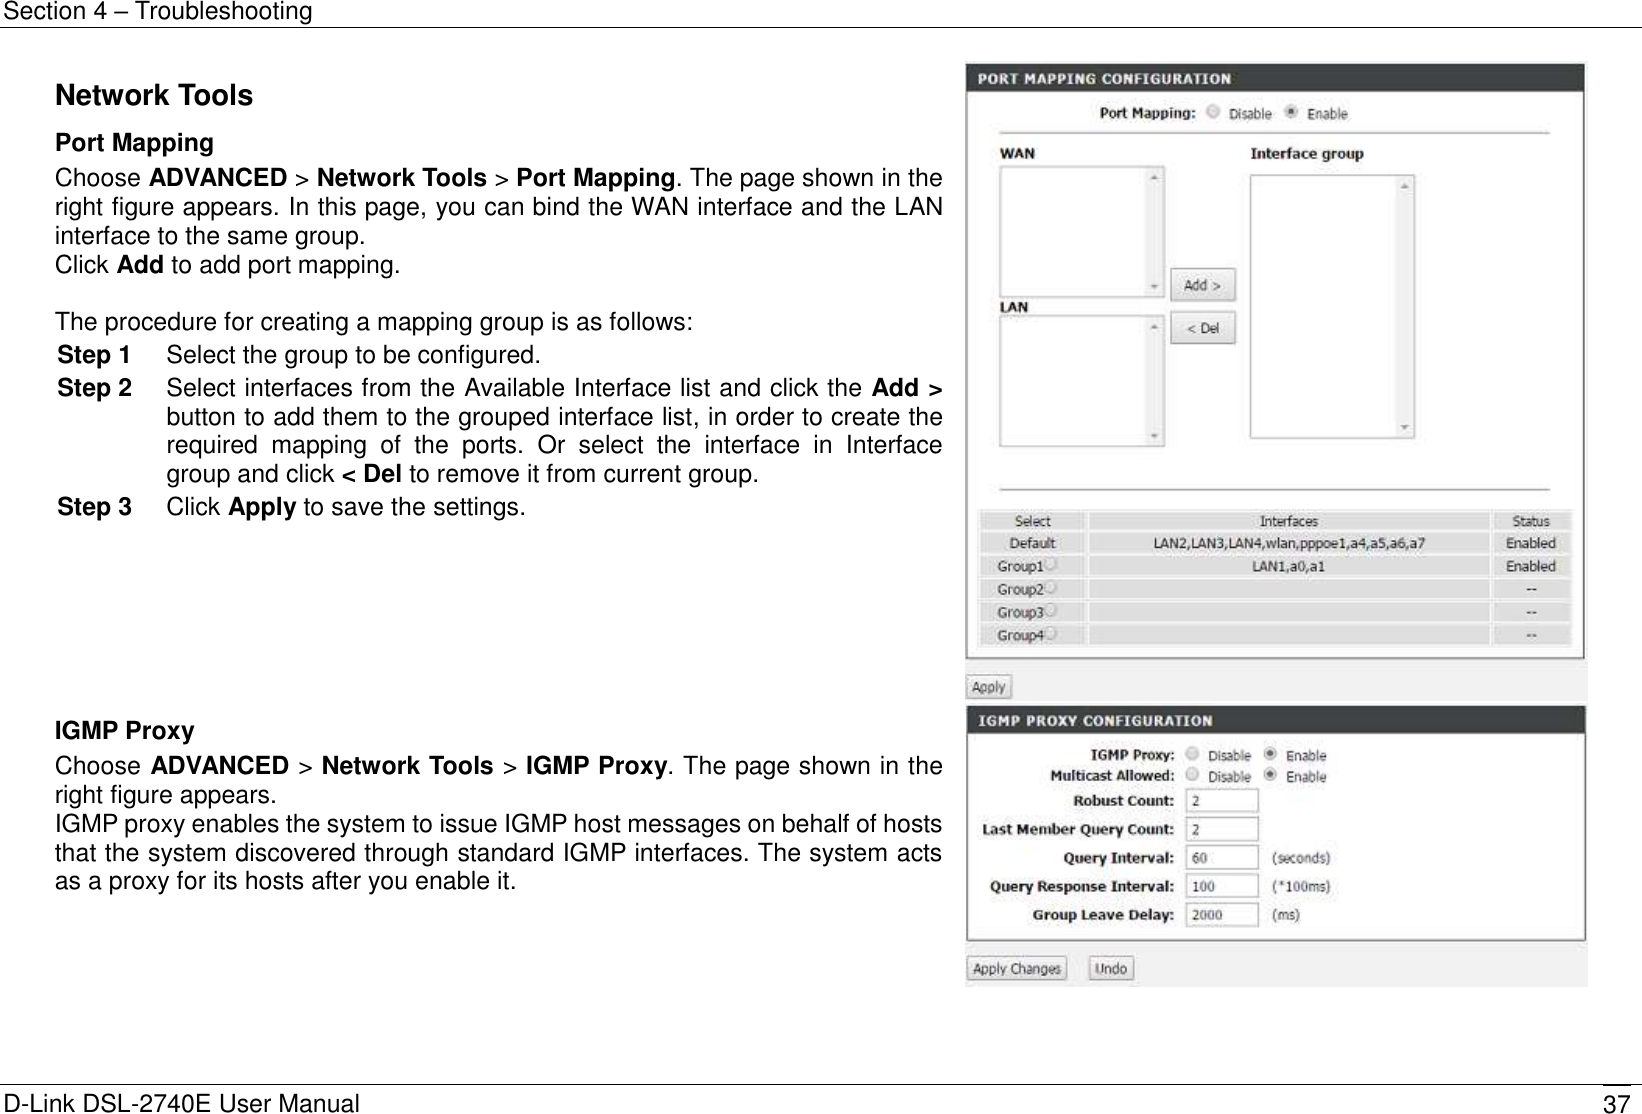 Section 4 – Troubleshooting D-Link DSL-2740E User Manual 37 Network Tools Port Mapping Choose ADVANCED &gt; Network Tools &gt; Port Mapping. The page shown in the right figure appears. In this page, you can bind the WAN interface and the LAN interface to the same group. Click Add to add port mapping.  The procedure for creating a mapping group is as follows: Step 1  Select the group to be configured. Step 2  Select interfaces from the Available Interface list and click the Add &gt; button to add them to the grouped interface list, in order to create the required  mapping  of  the  ports.  Or  select  the  interface  in  Interface group and click &lt; Del to remove it from current group. Step 3  Click Apply to save the settings.   IGMP Proxy Choose ADVANCED &gt; Network Tools &gt; IGMP Proxy. The page shown in the right figure appears. IGMP proxy enables the system to issue IGMP host messages on behalf of hosts that the system discovered through standard IGMP interfaces. The system acts as a proxy for its hosts after you enable it.  